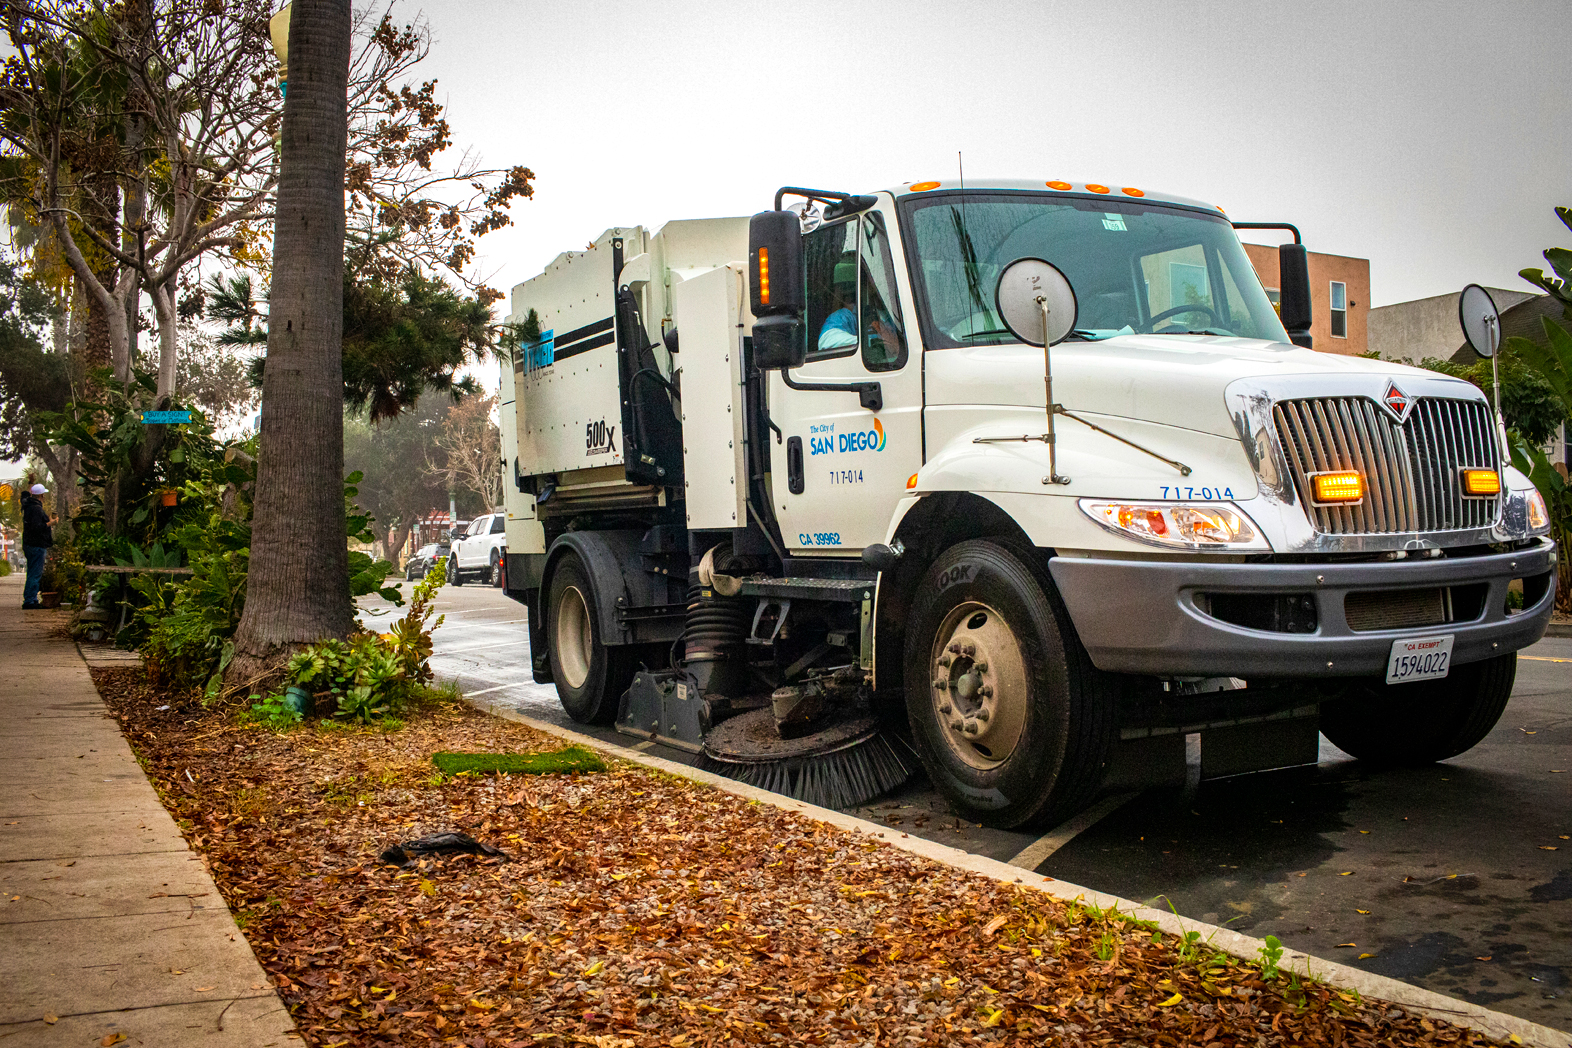 City of San Diego street sweeper cleaning up a road